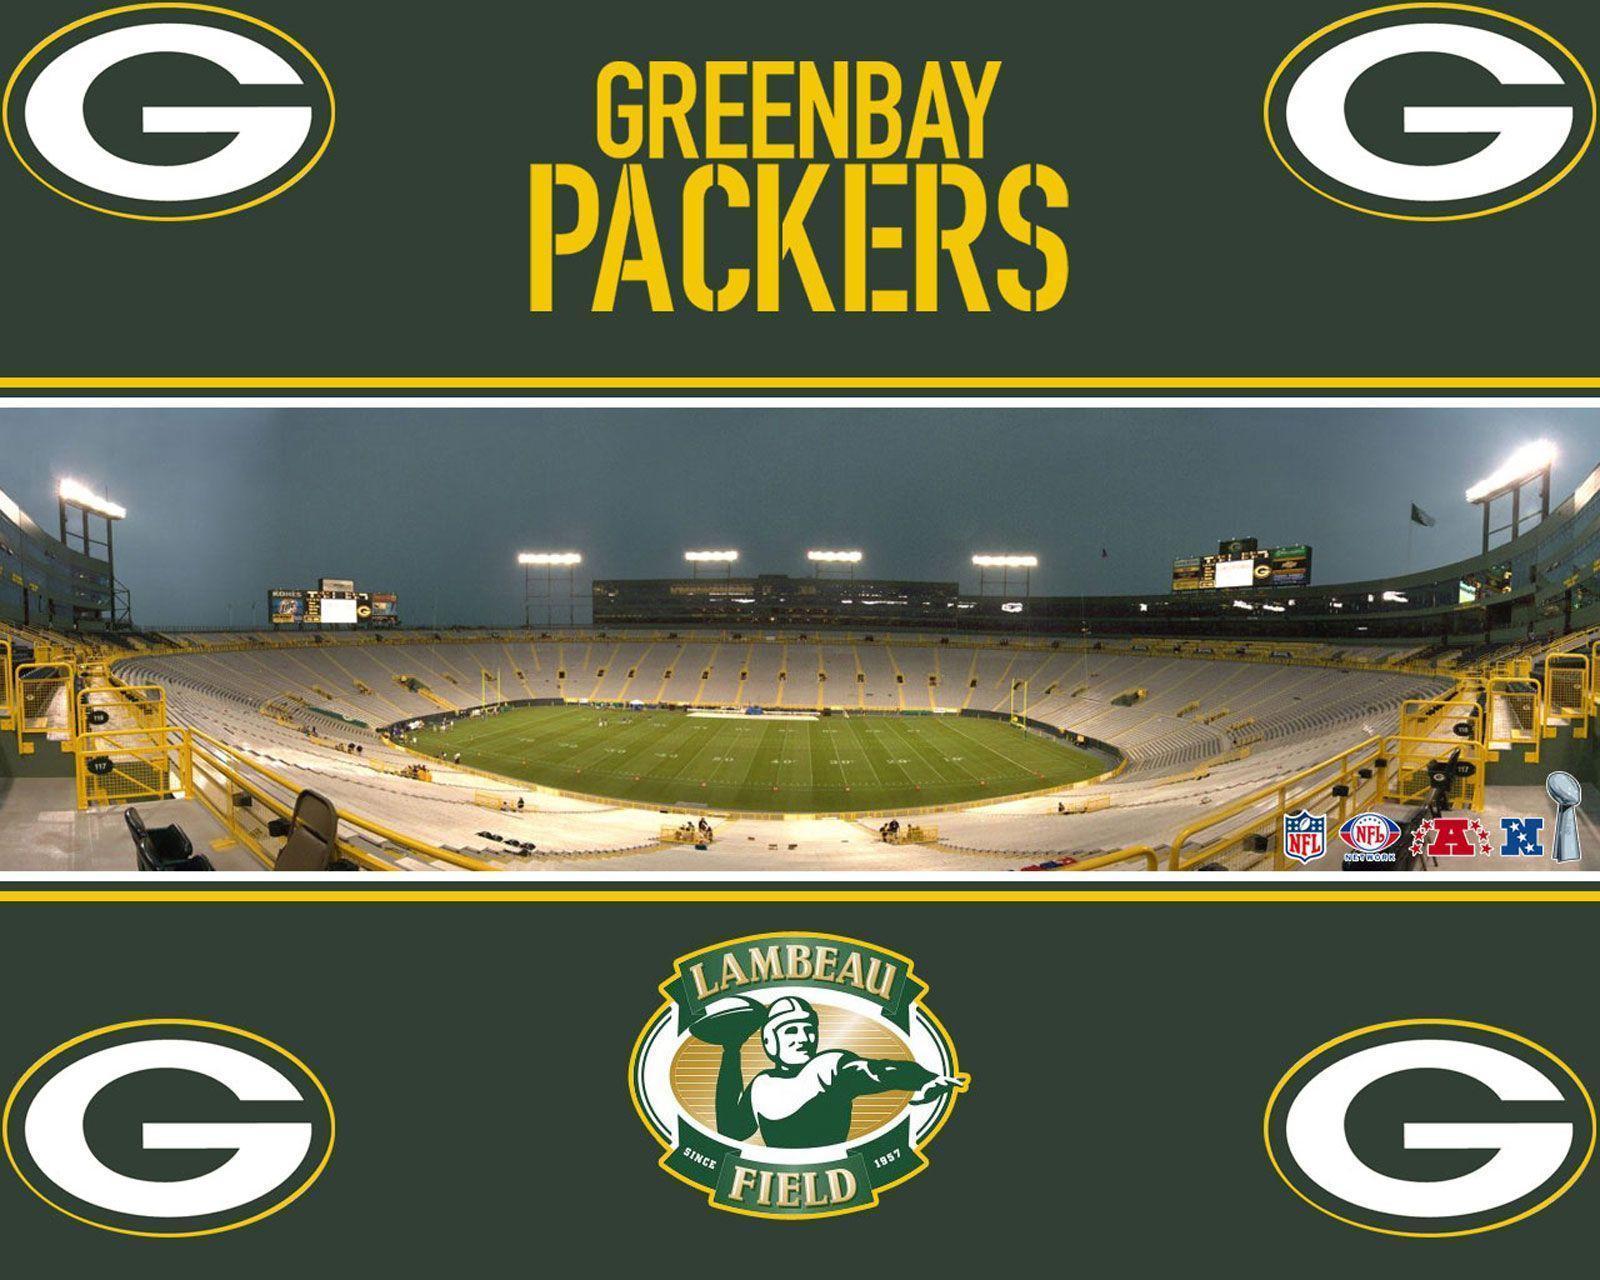 Green Bay Packers image Lambeau Field HD wallpaper and background